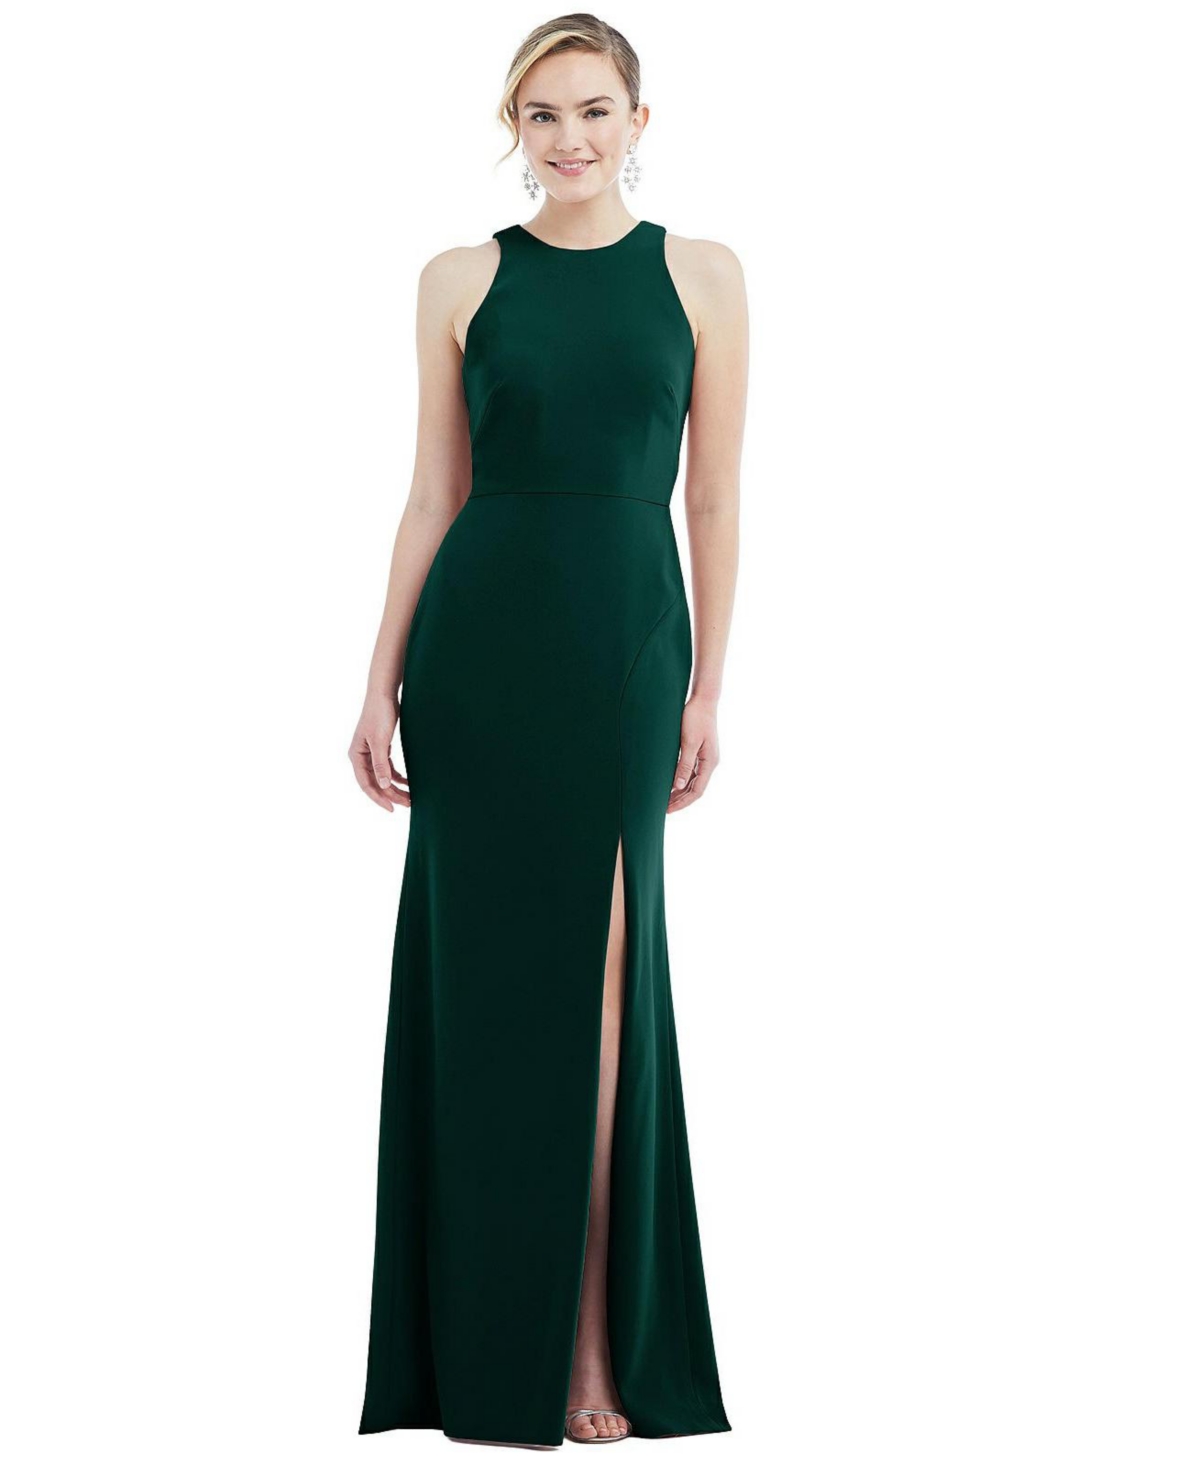 Cutout Open-Back Halter Maxi Dress with Scarf Tie - Evergreen